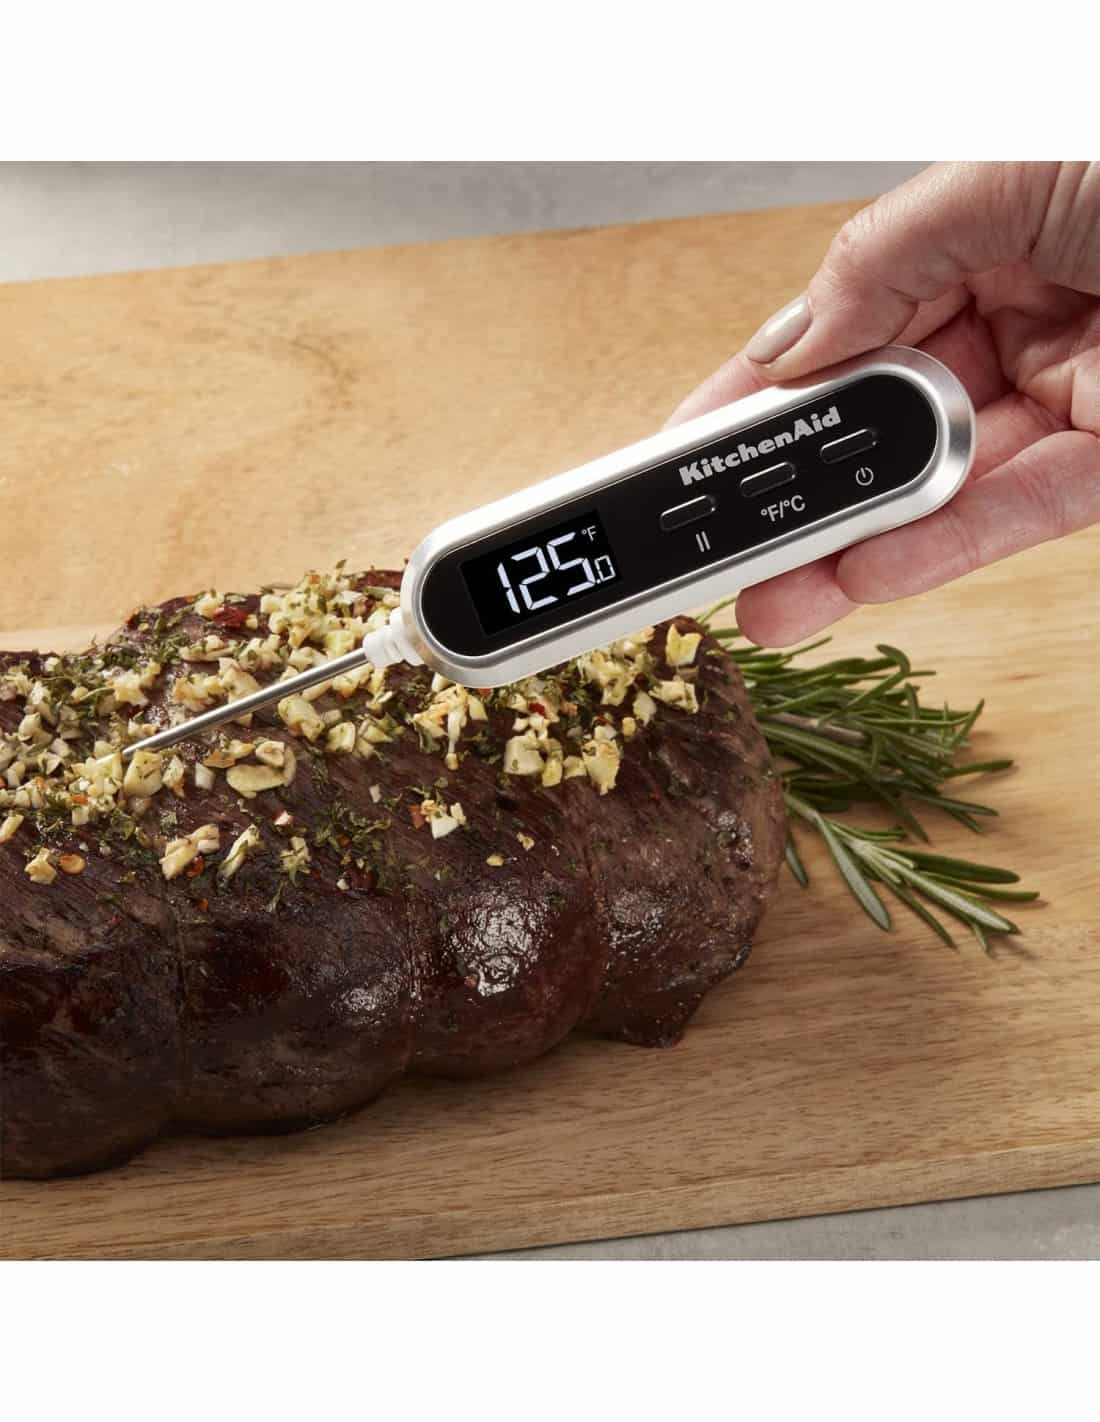 https://www.mimocook.com/31167-thickbox_default/kitchenaid-backlit-digital-instant-thermometer-for-cooking.jpg